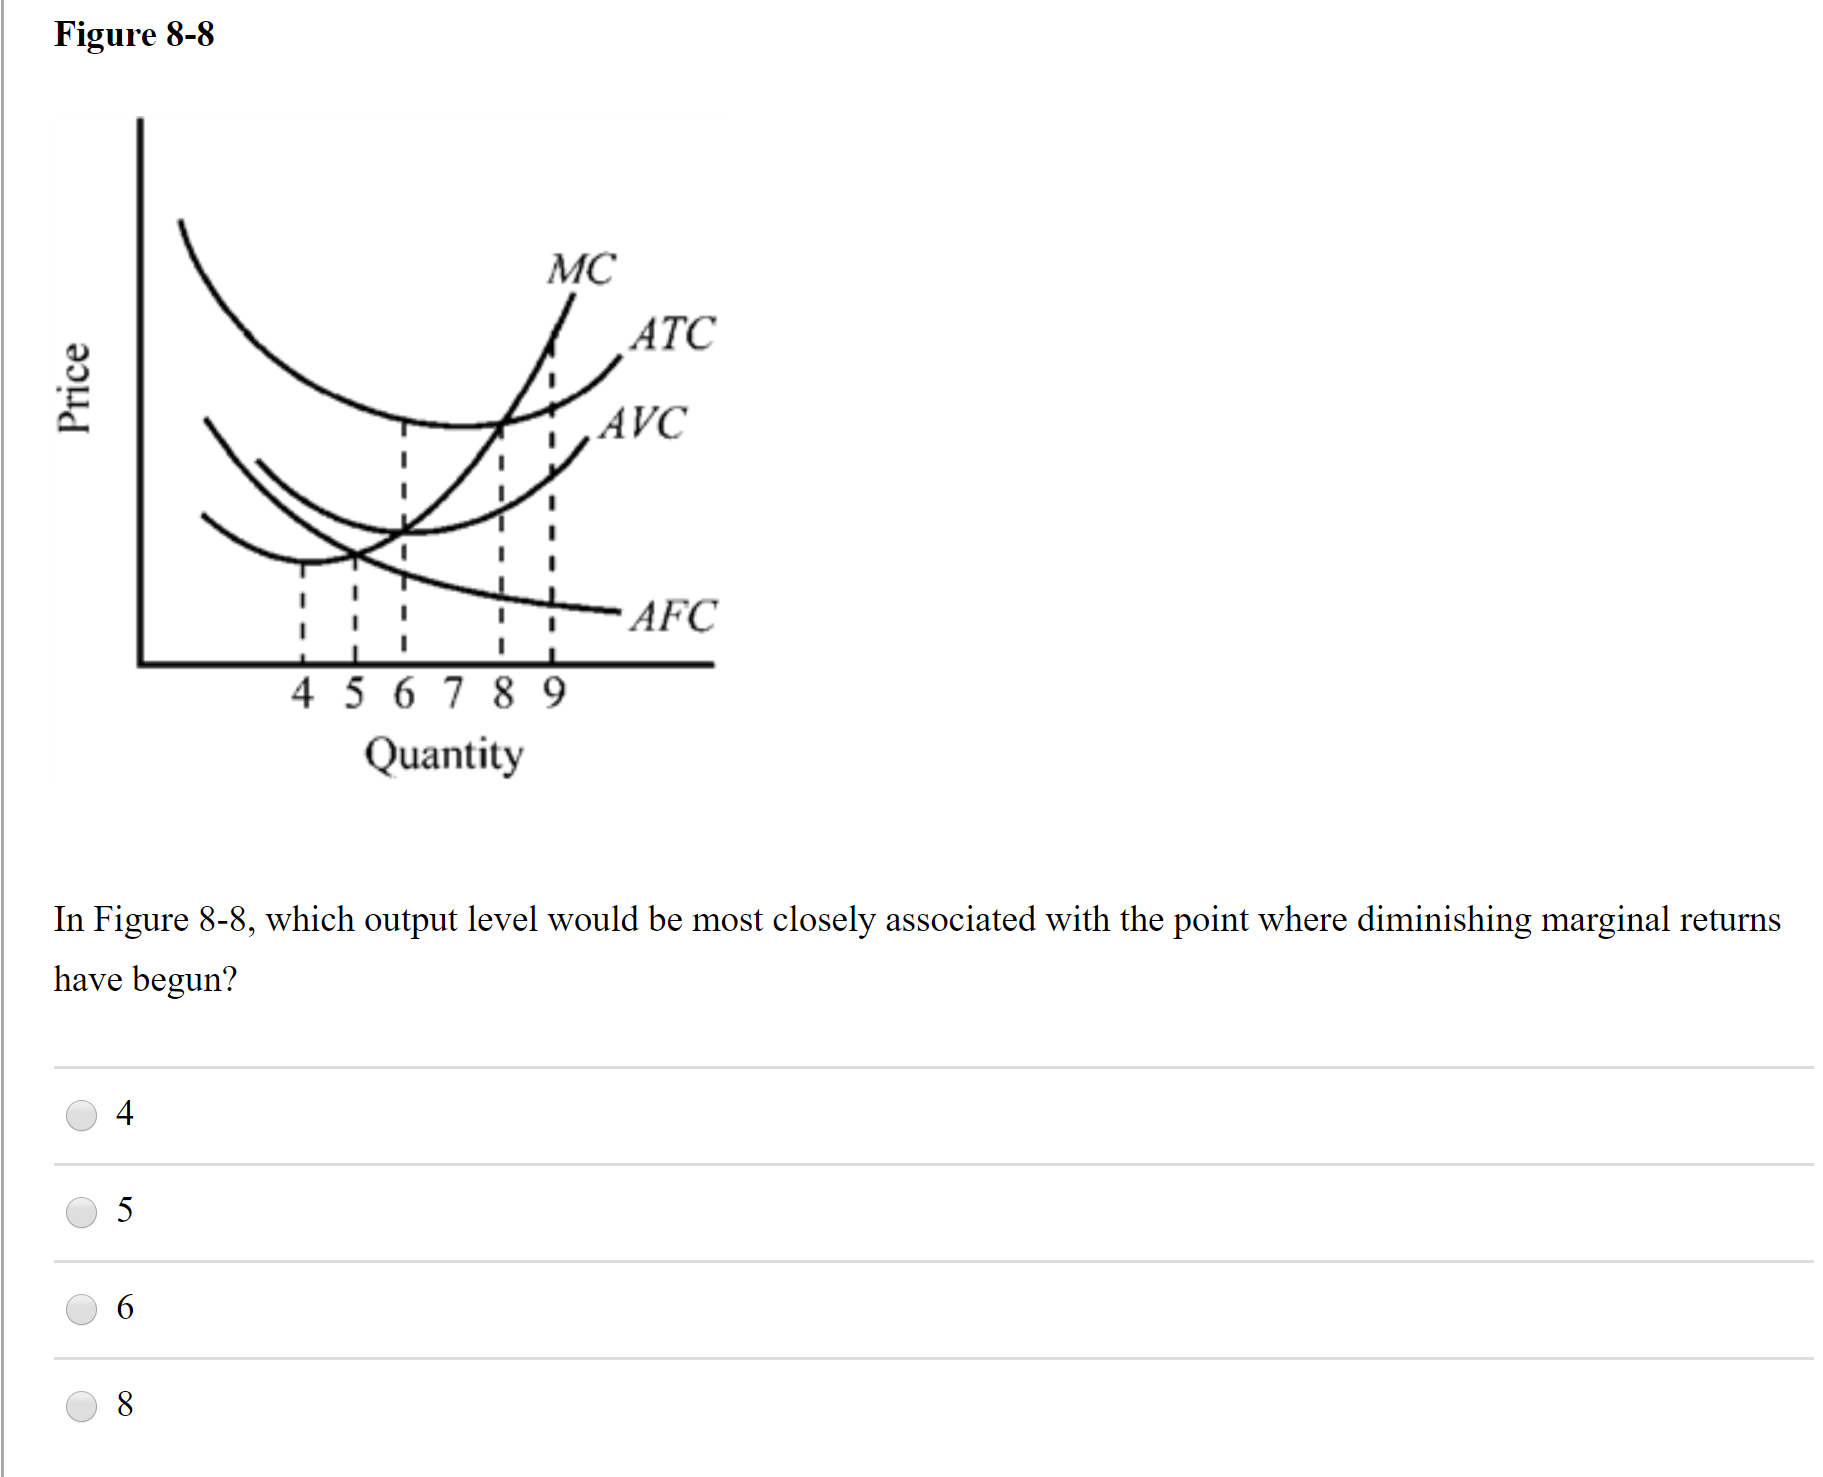 Figure 8-8
MC
ATC
AVC
AFC
4 5 6 7 8 9
Quantity
In Figure 8-8, which output level would be most closely associated with the point where diminishing marginal returns
have begun?
4
6.
8.
Price
